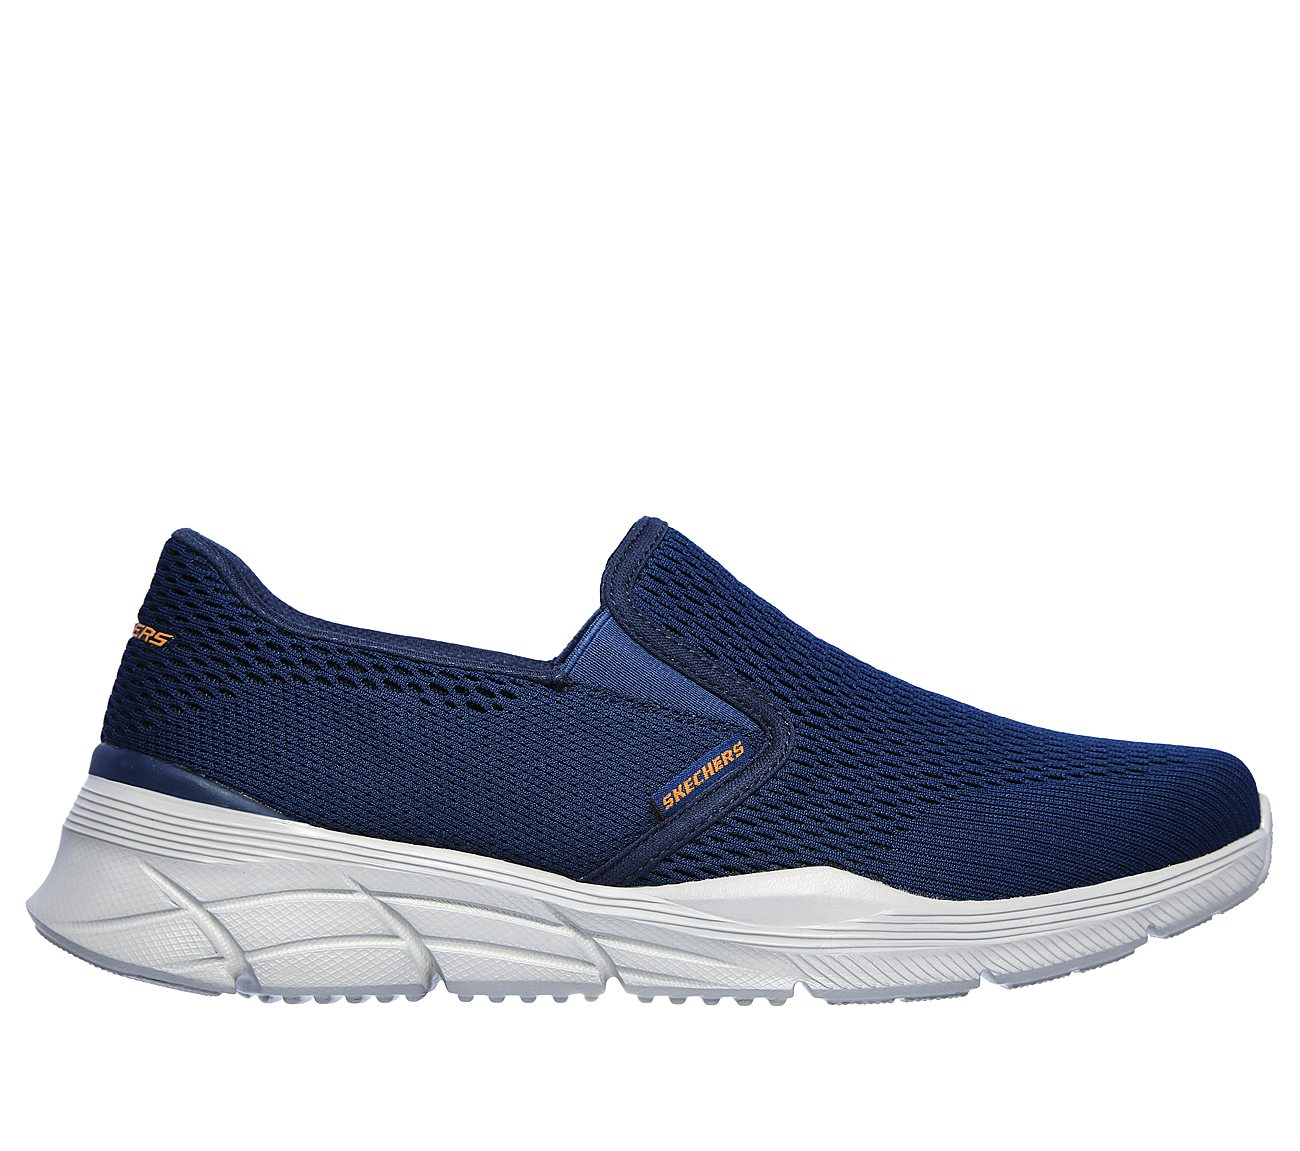 skechers equalizer double play uk